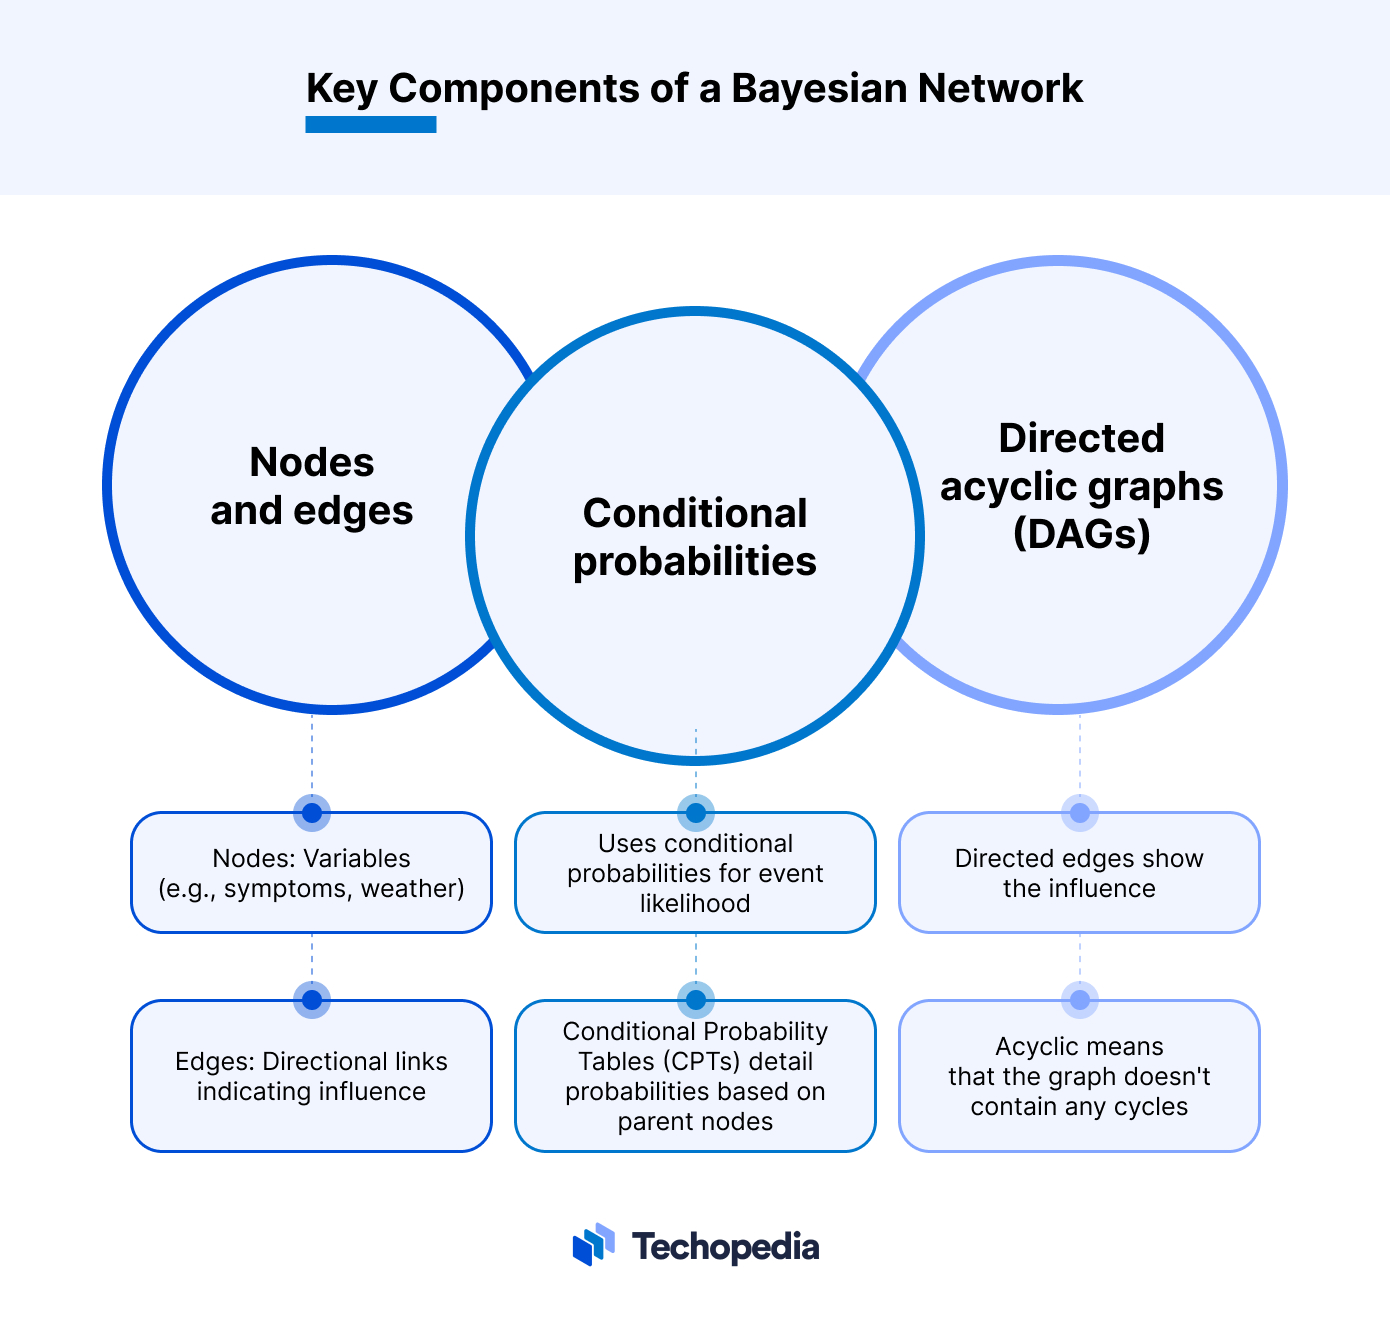 Key Components of Bayesian Network